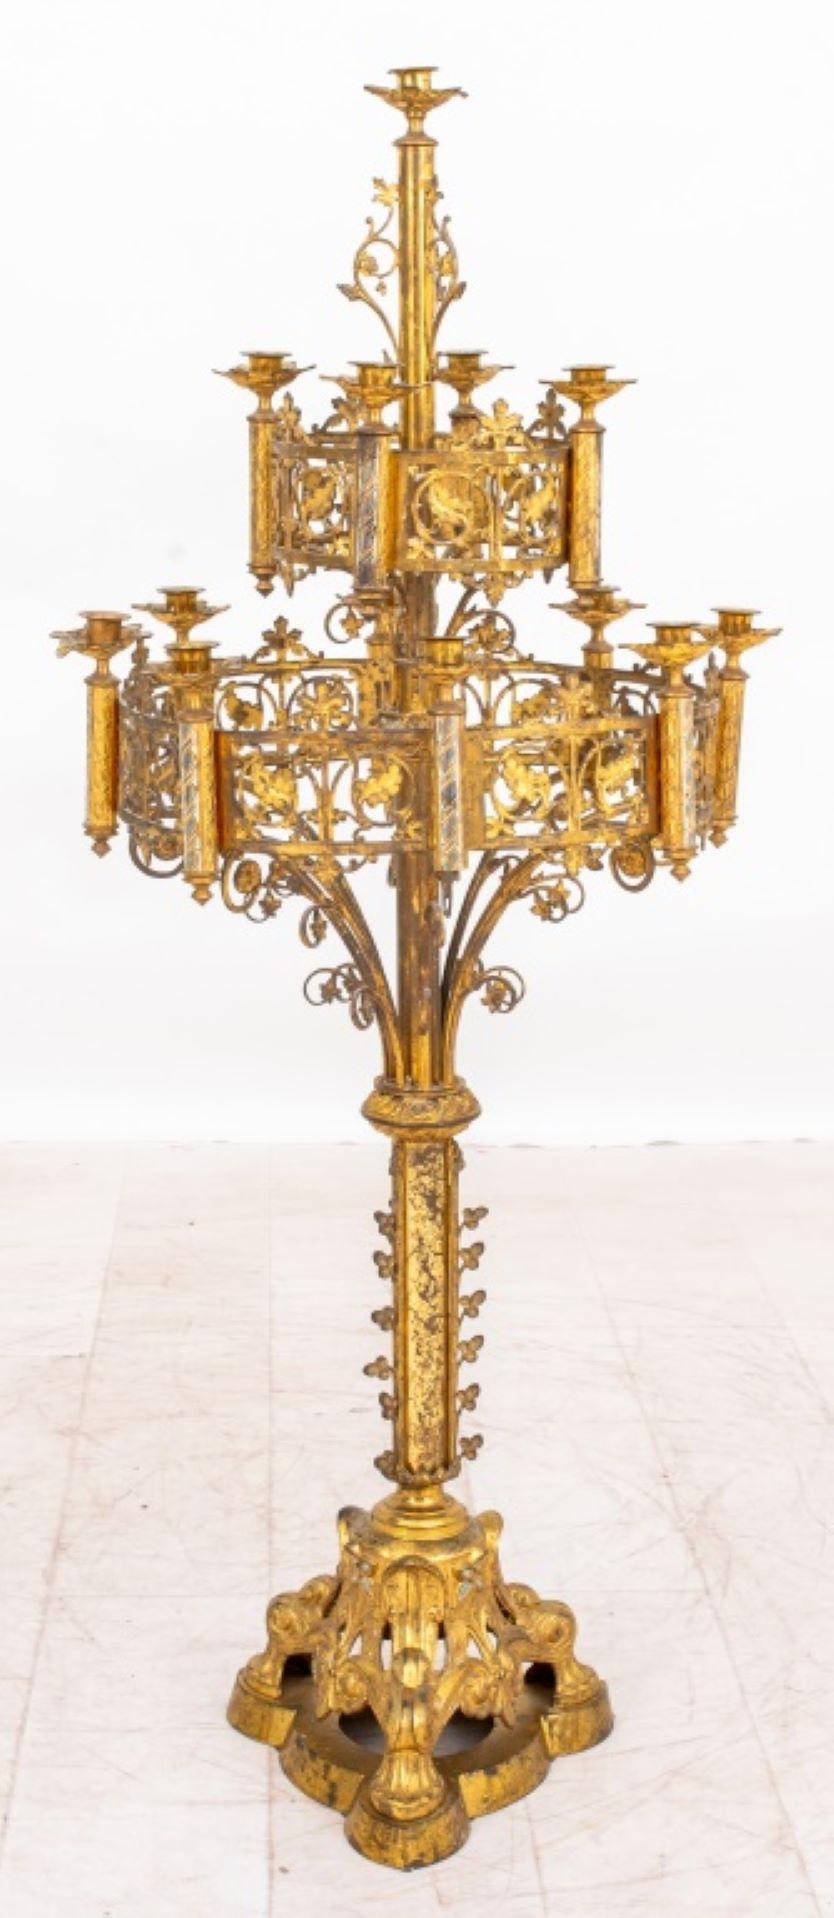 Pair of Gothic Revival Gilt Metal 13 Light Two Tiered Pedestal Candelabra, each with 13 lights in two tracery aproned tiers supported by a pedestal base, in the manner of A.W.N. Pugin (English, 1812-1852) and similar to those pictured in Designs for